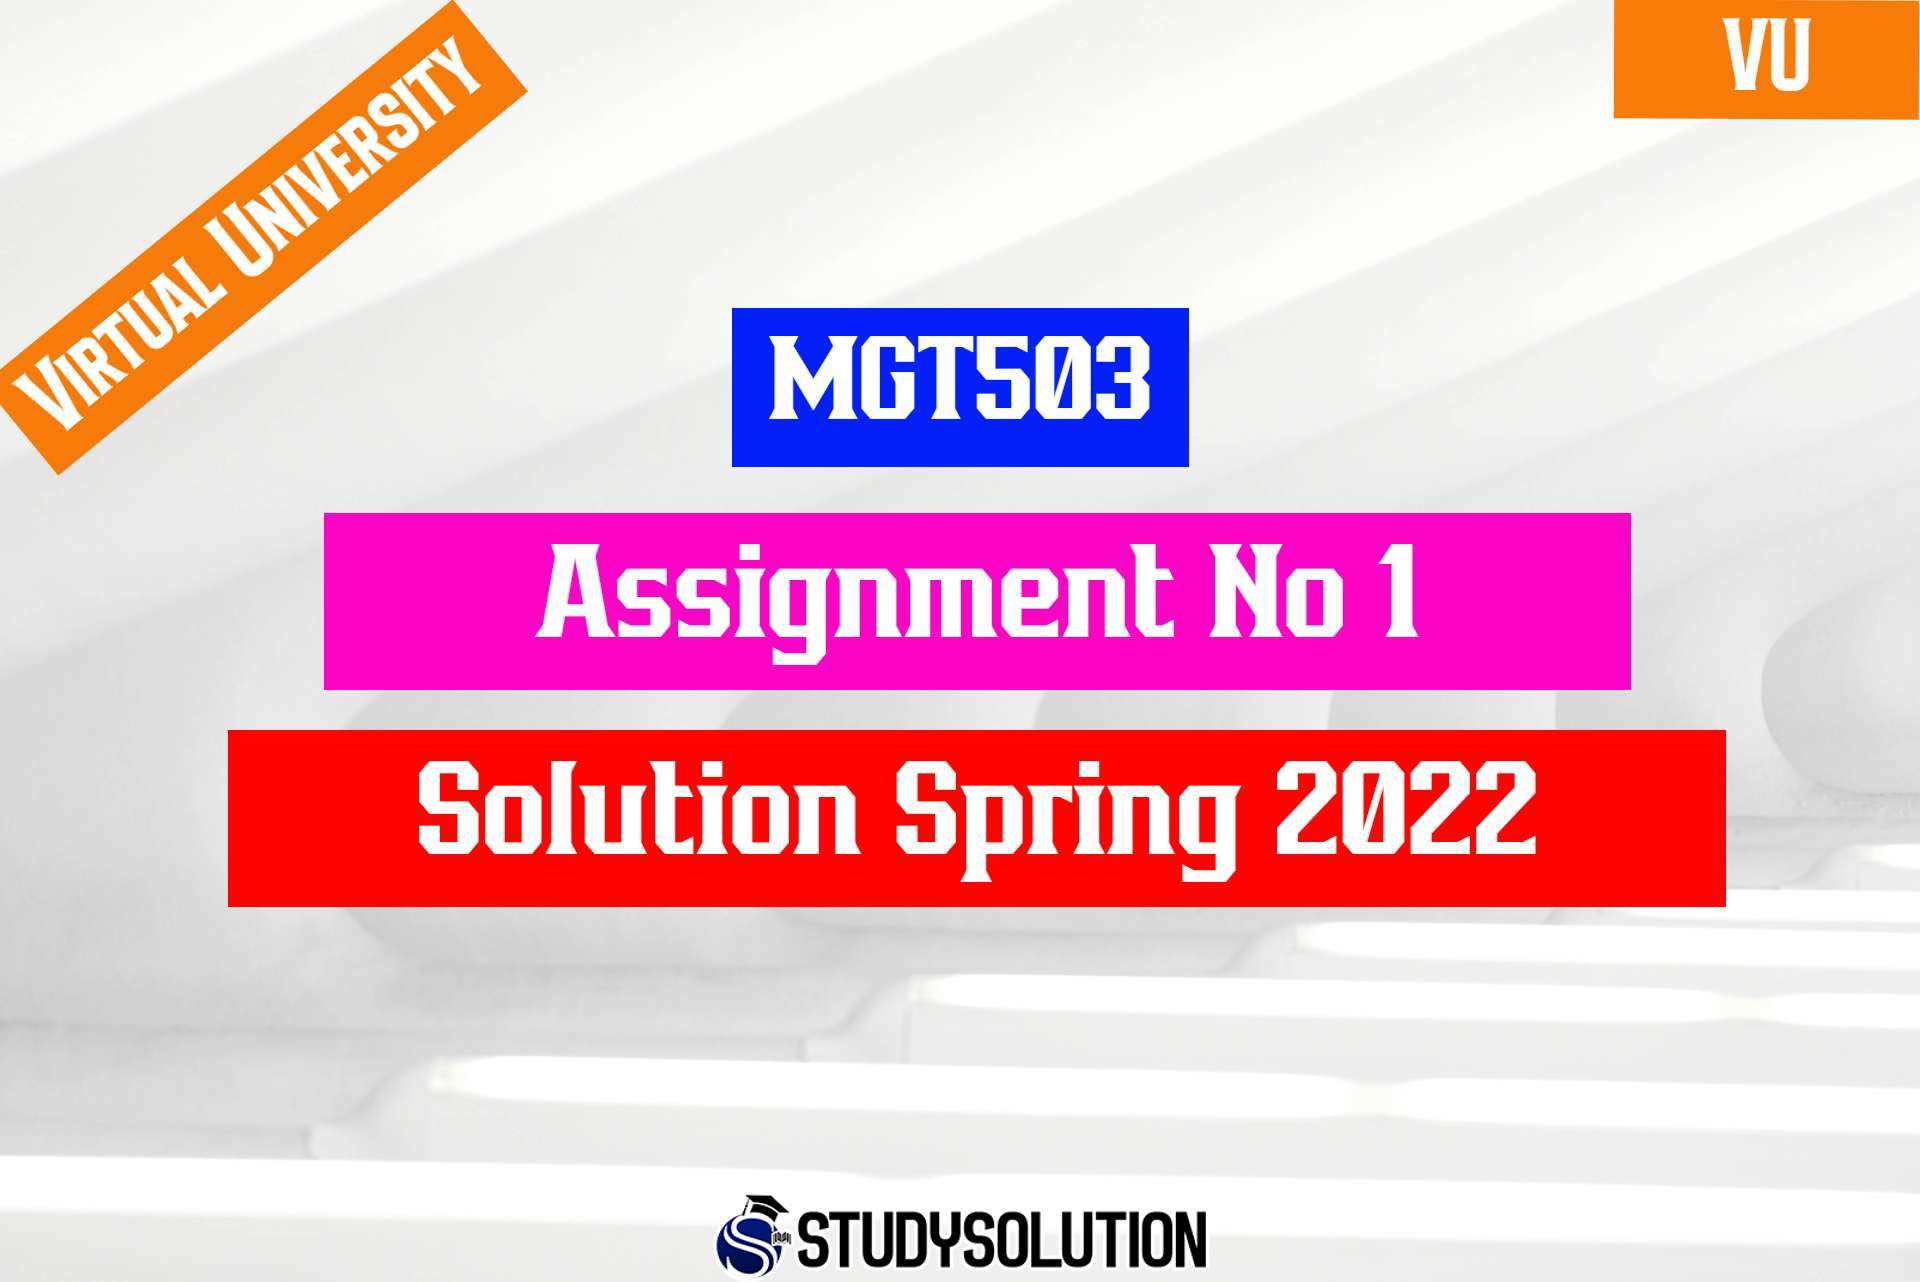 MGT503 Assignment No 1 Solution Spring 2022